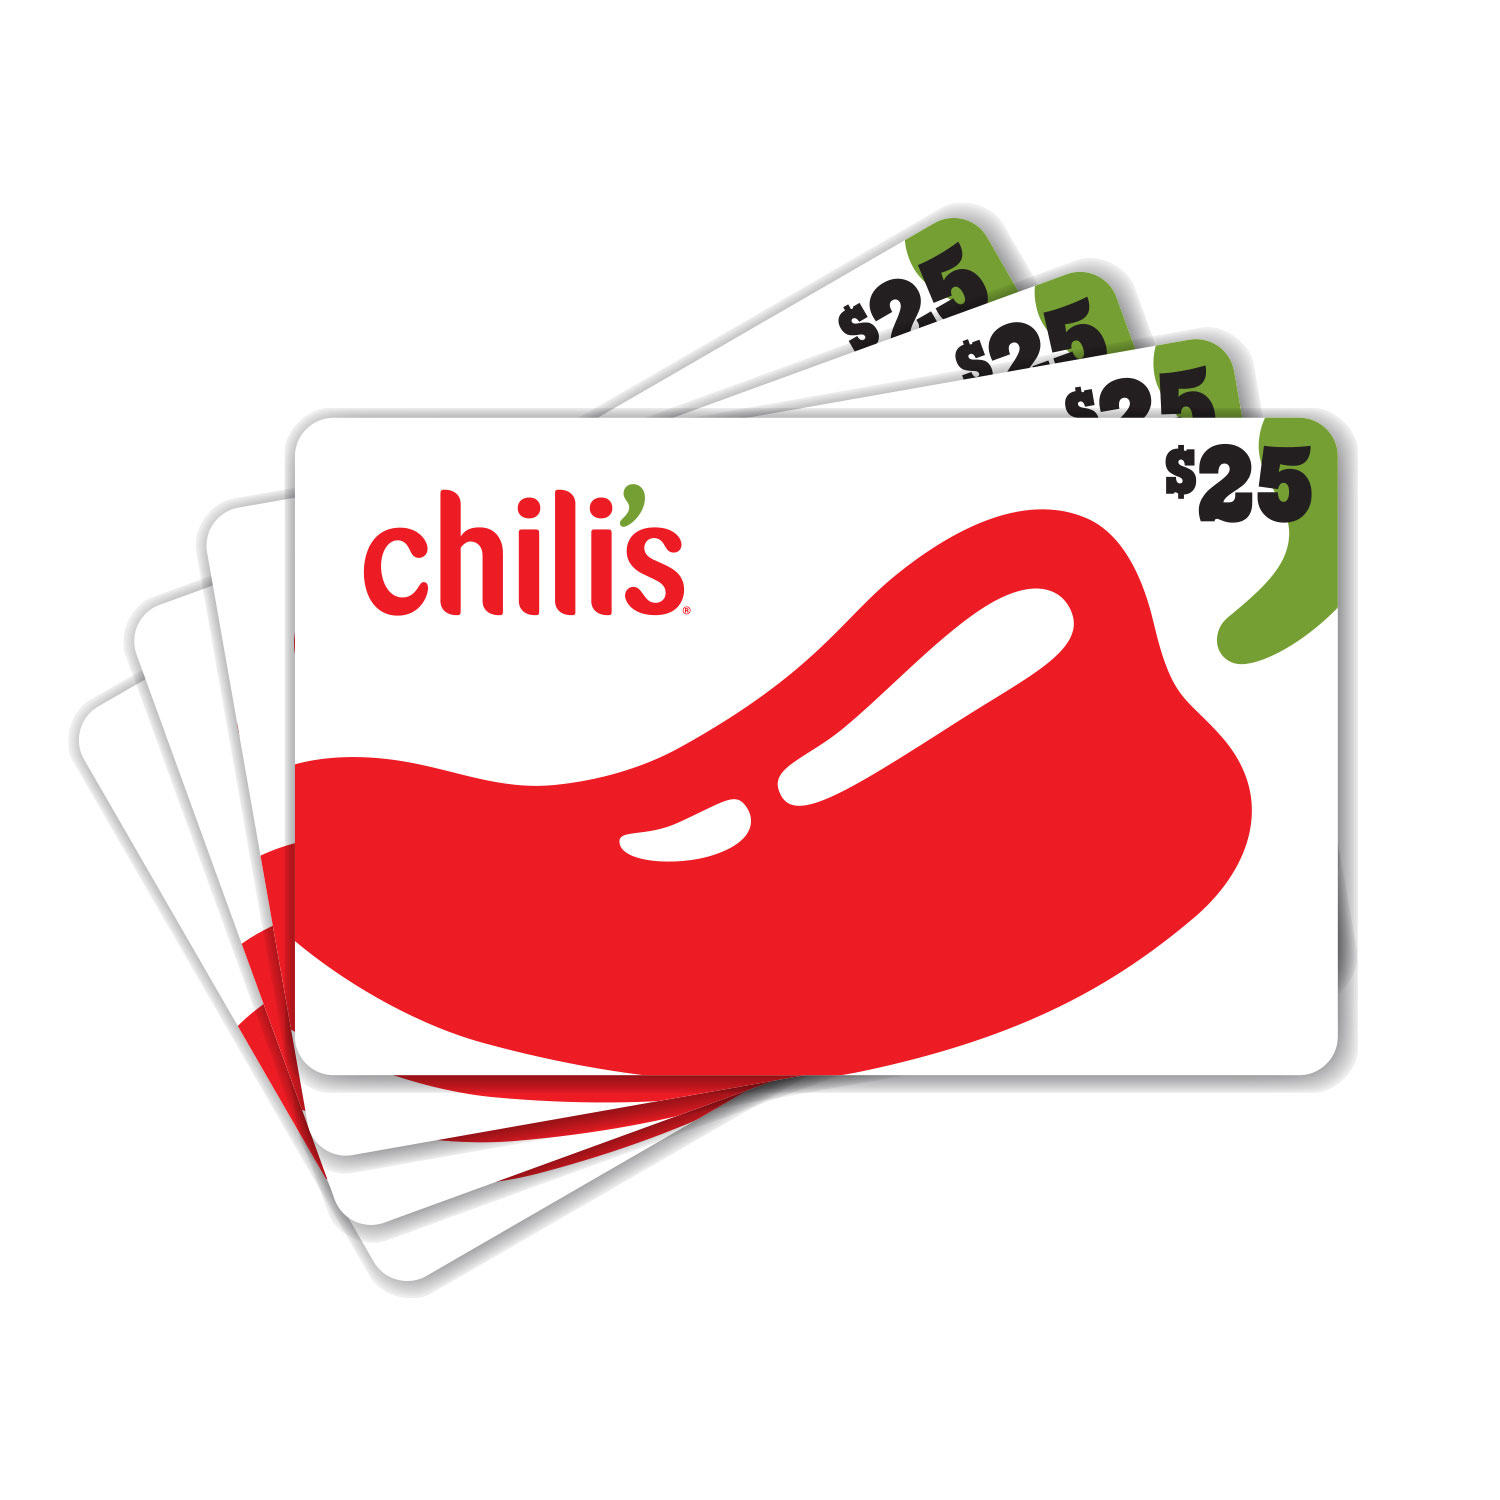 100 Chili S Gift Cards Only 85 98 Edealinfo Com